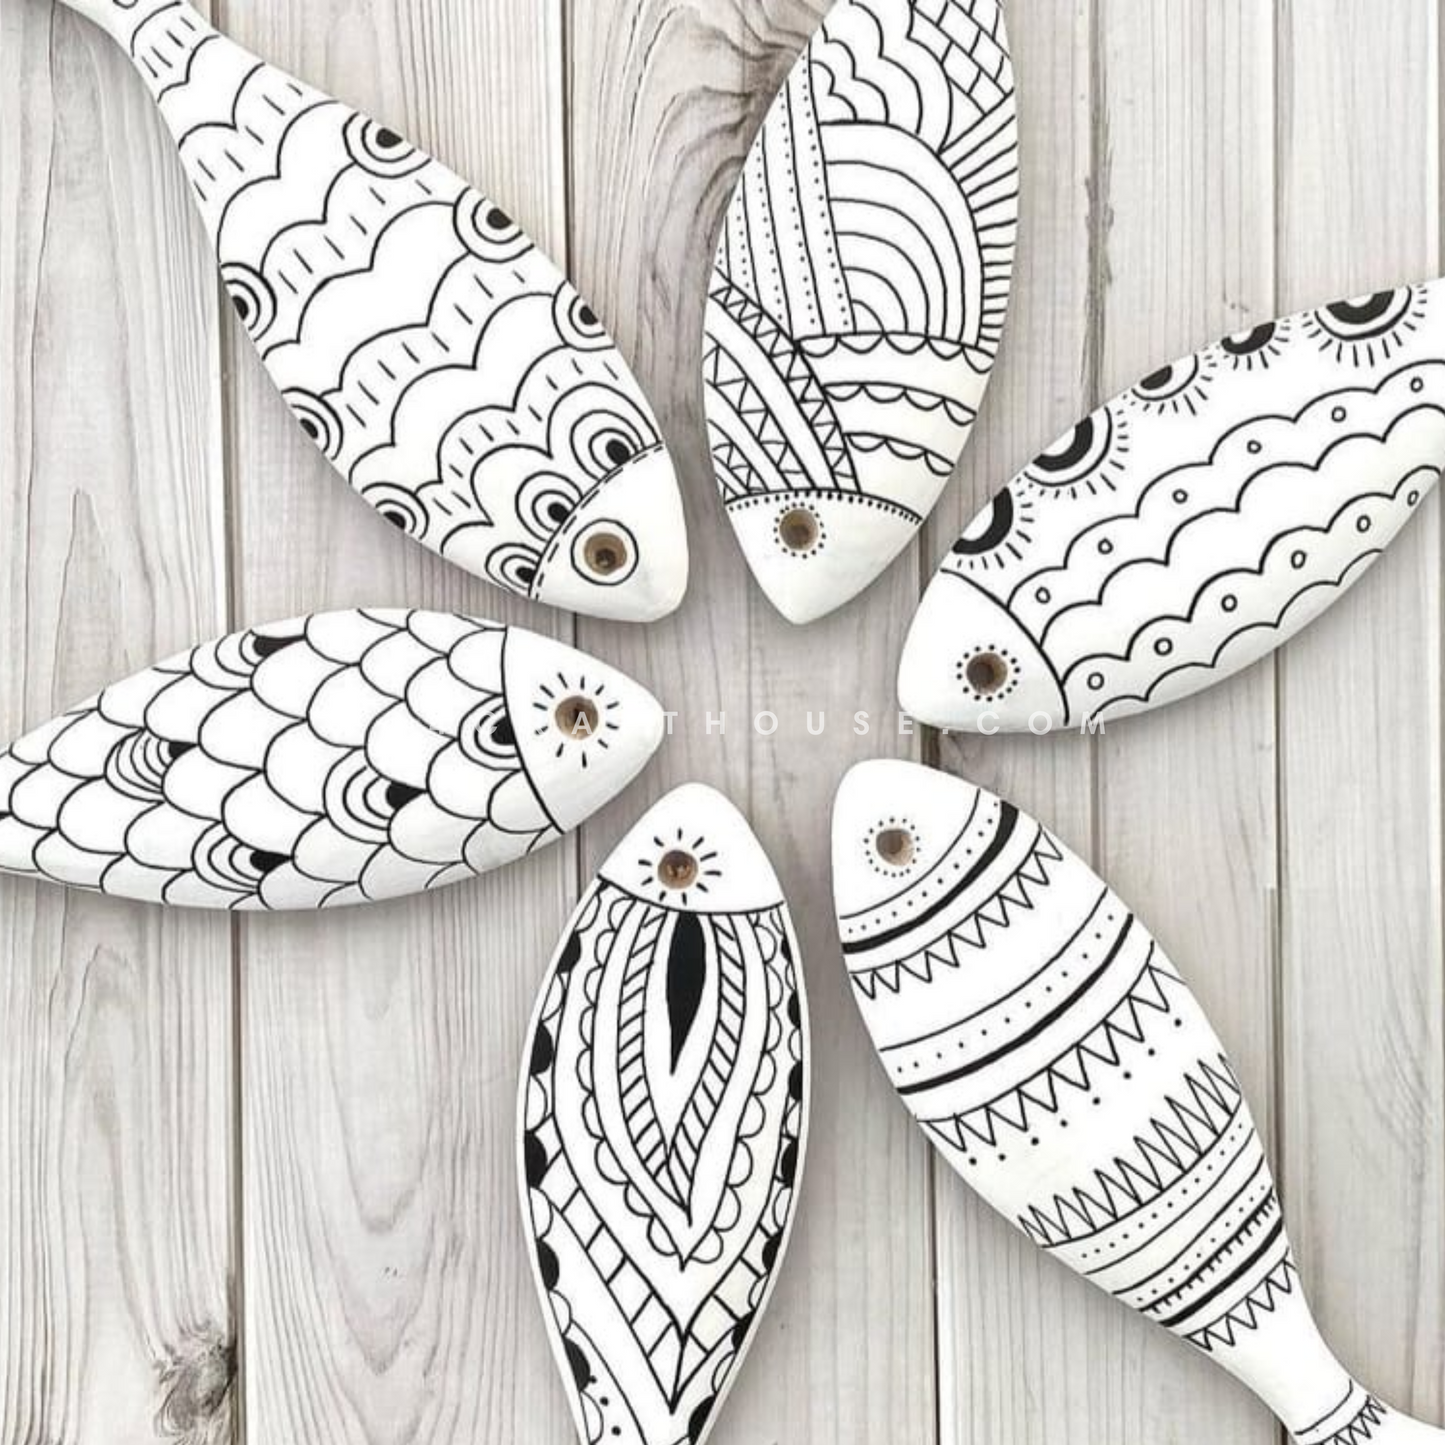 3D Unfinished Wooden Fish For DIY Craft Projects